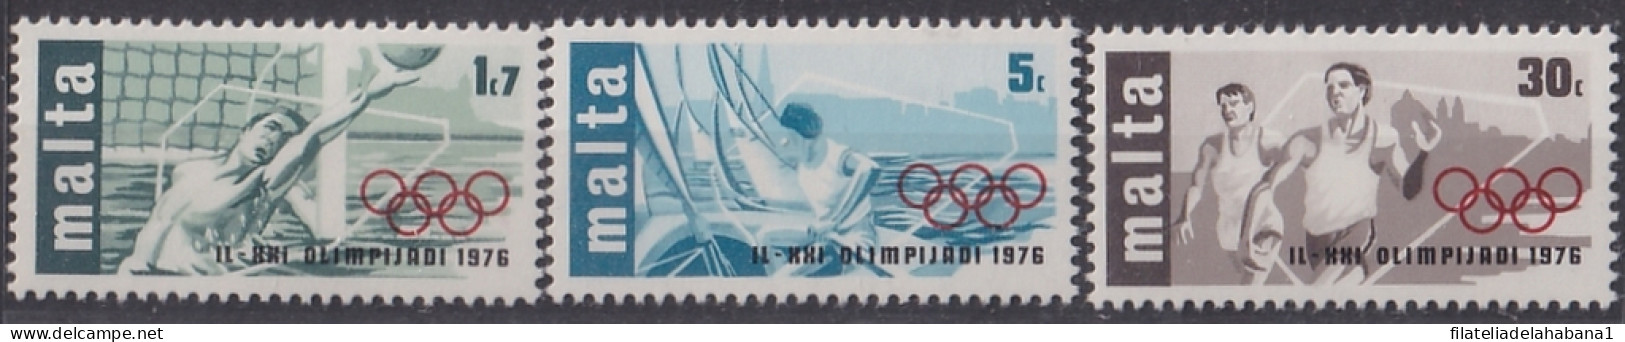 F-EX47597 MALTA MNH 1976 MONTREAL OLYMPIC GAMES ATHLETISM YACHTING WATERPOLO.  - Verano 1976: Montréal